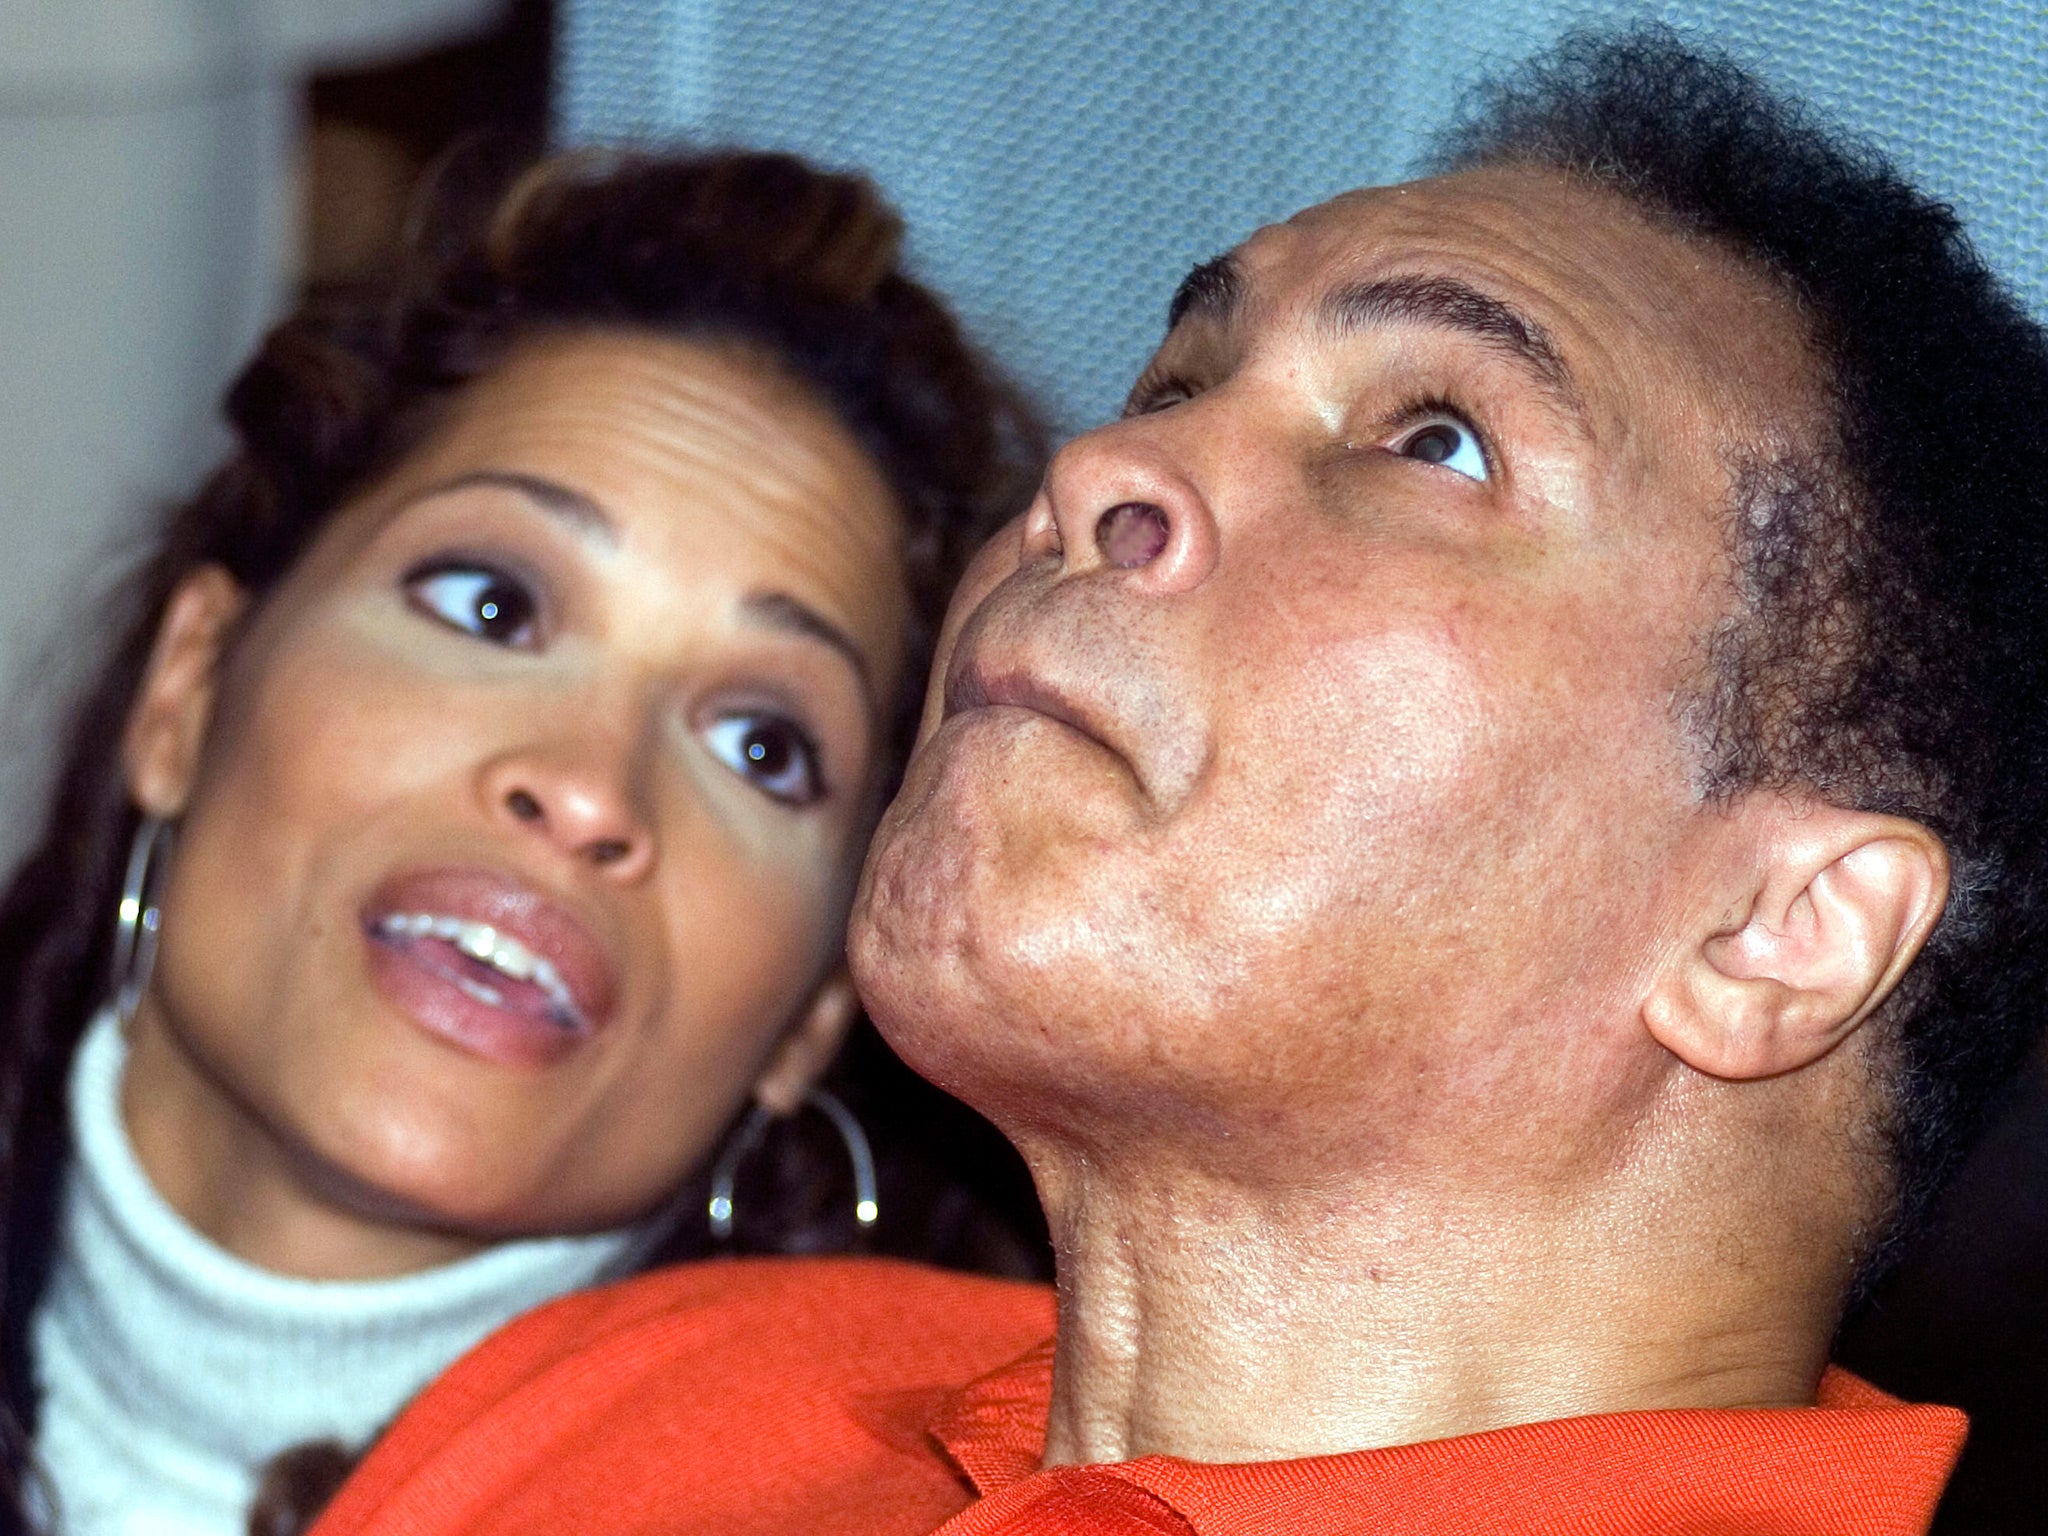 Muhammad Ali S Daughter Rasheda Ali On Her Father S Life Death And Last Words To Her The